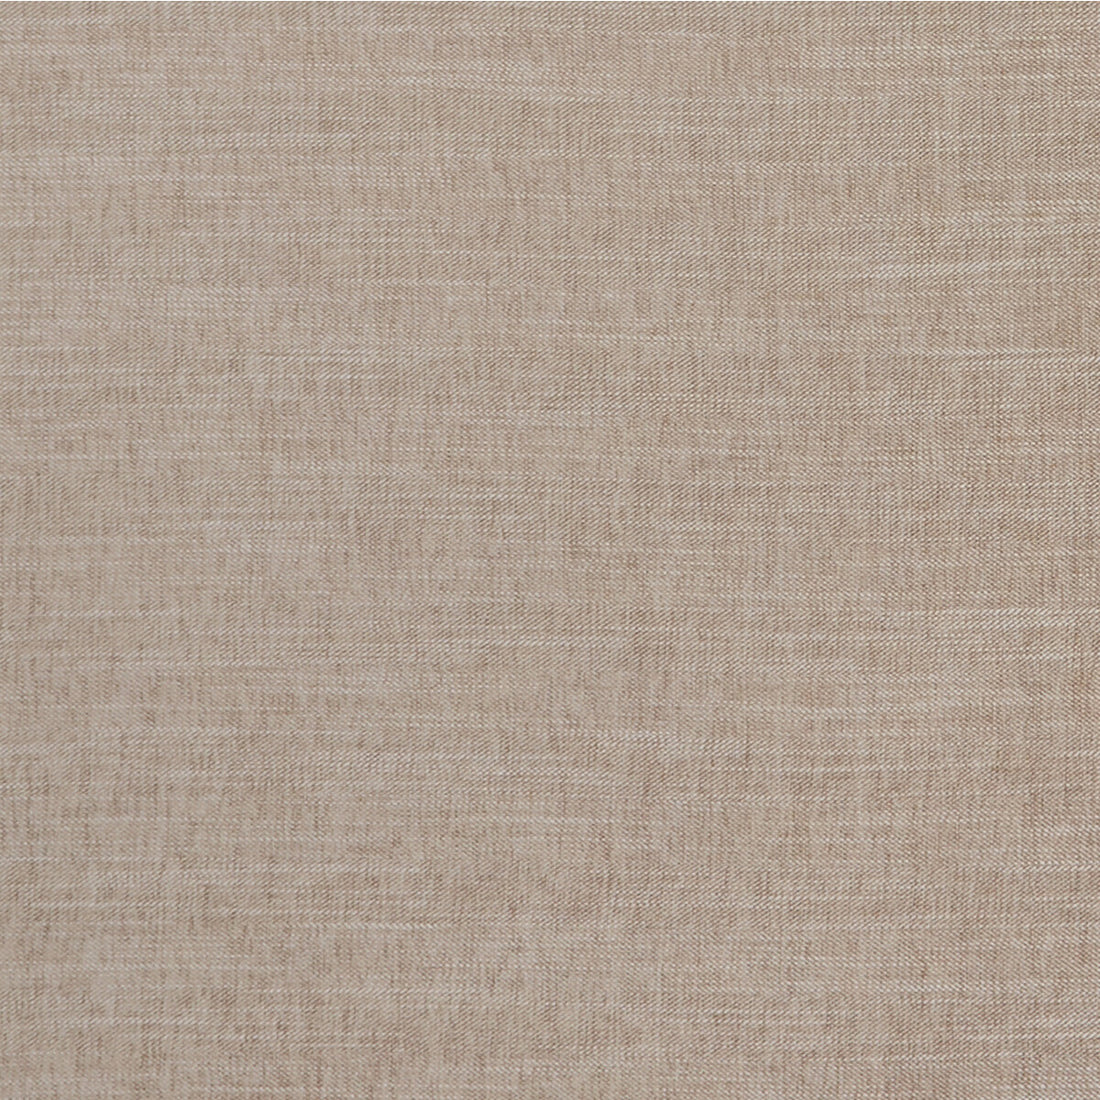 Moray fabric in latte color - pattern F1099/16.CAC.0 - by Clarke And Clarke in the Clarke &amp; Clarke Albany &amp; Moray collection